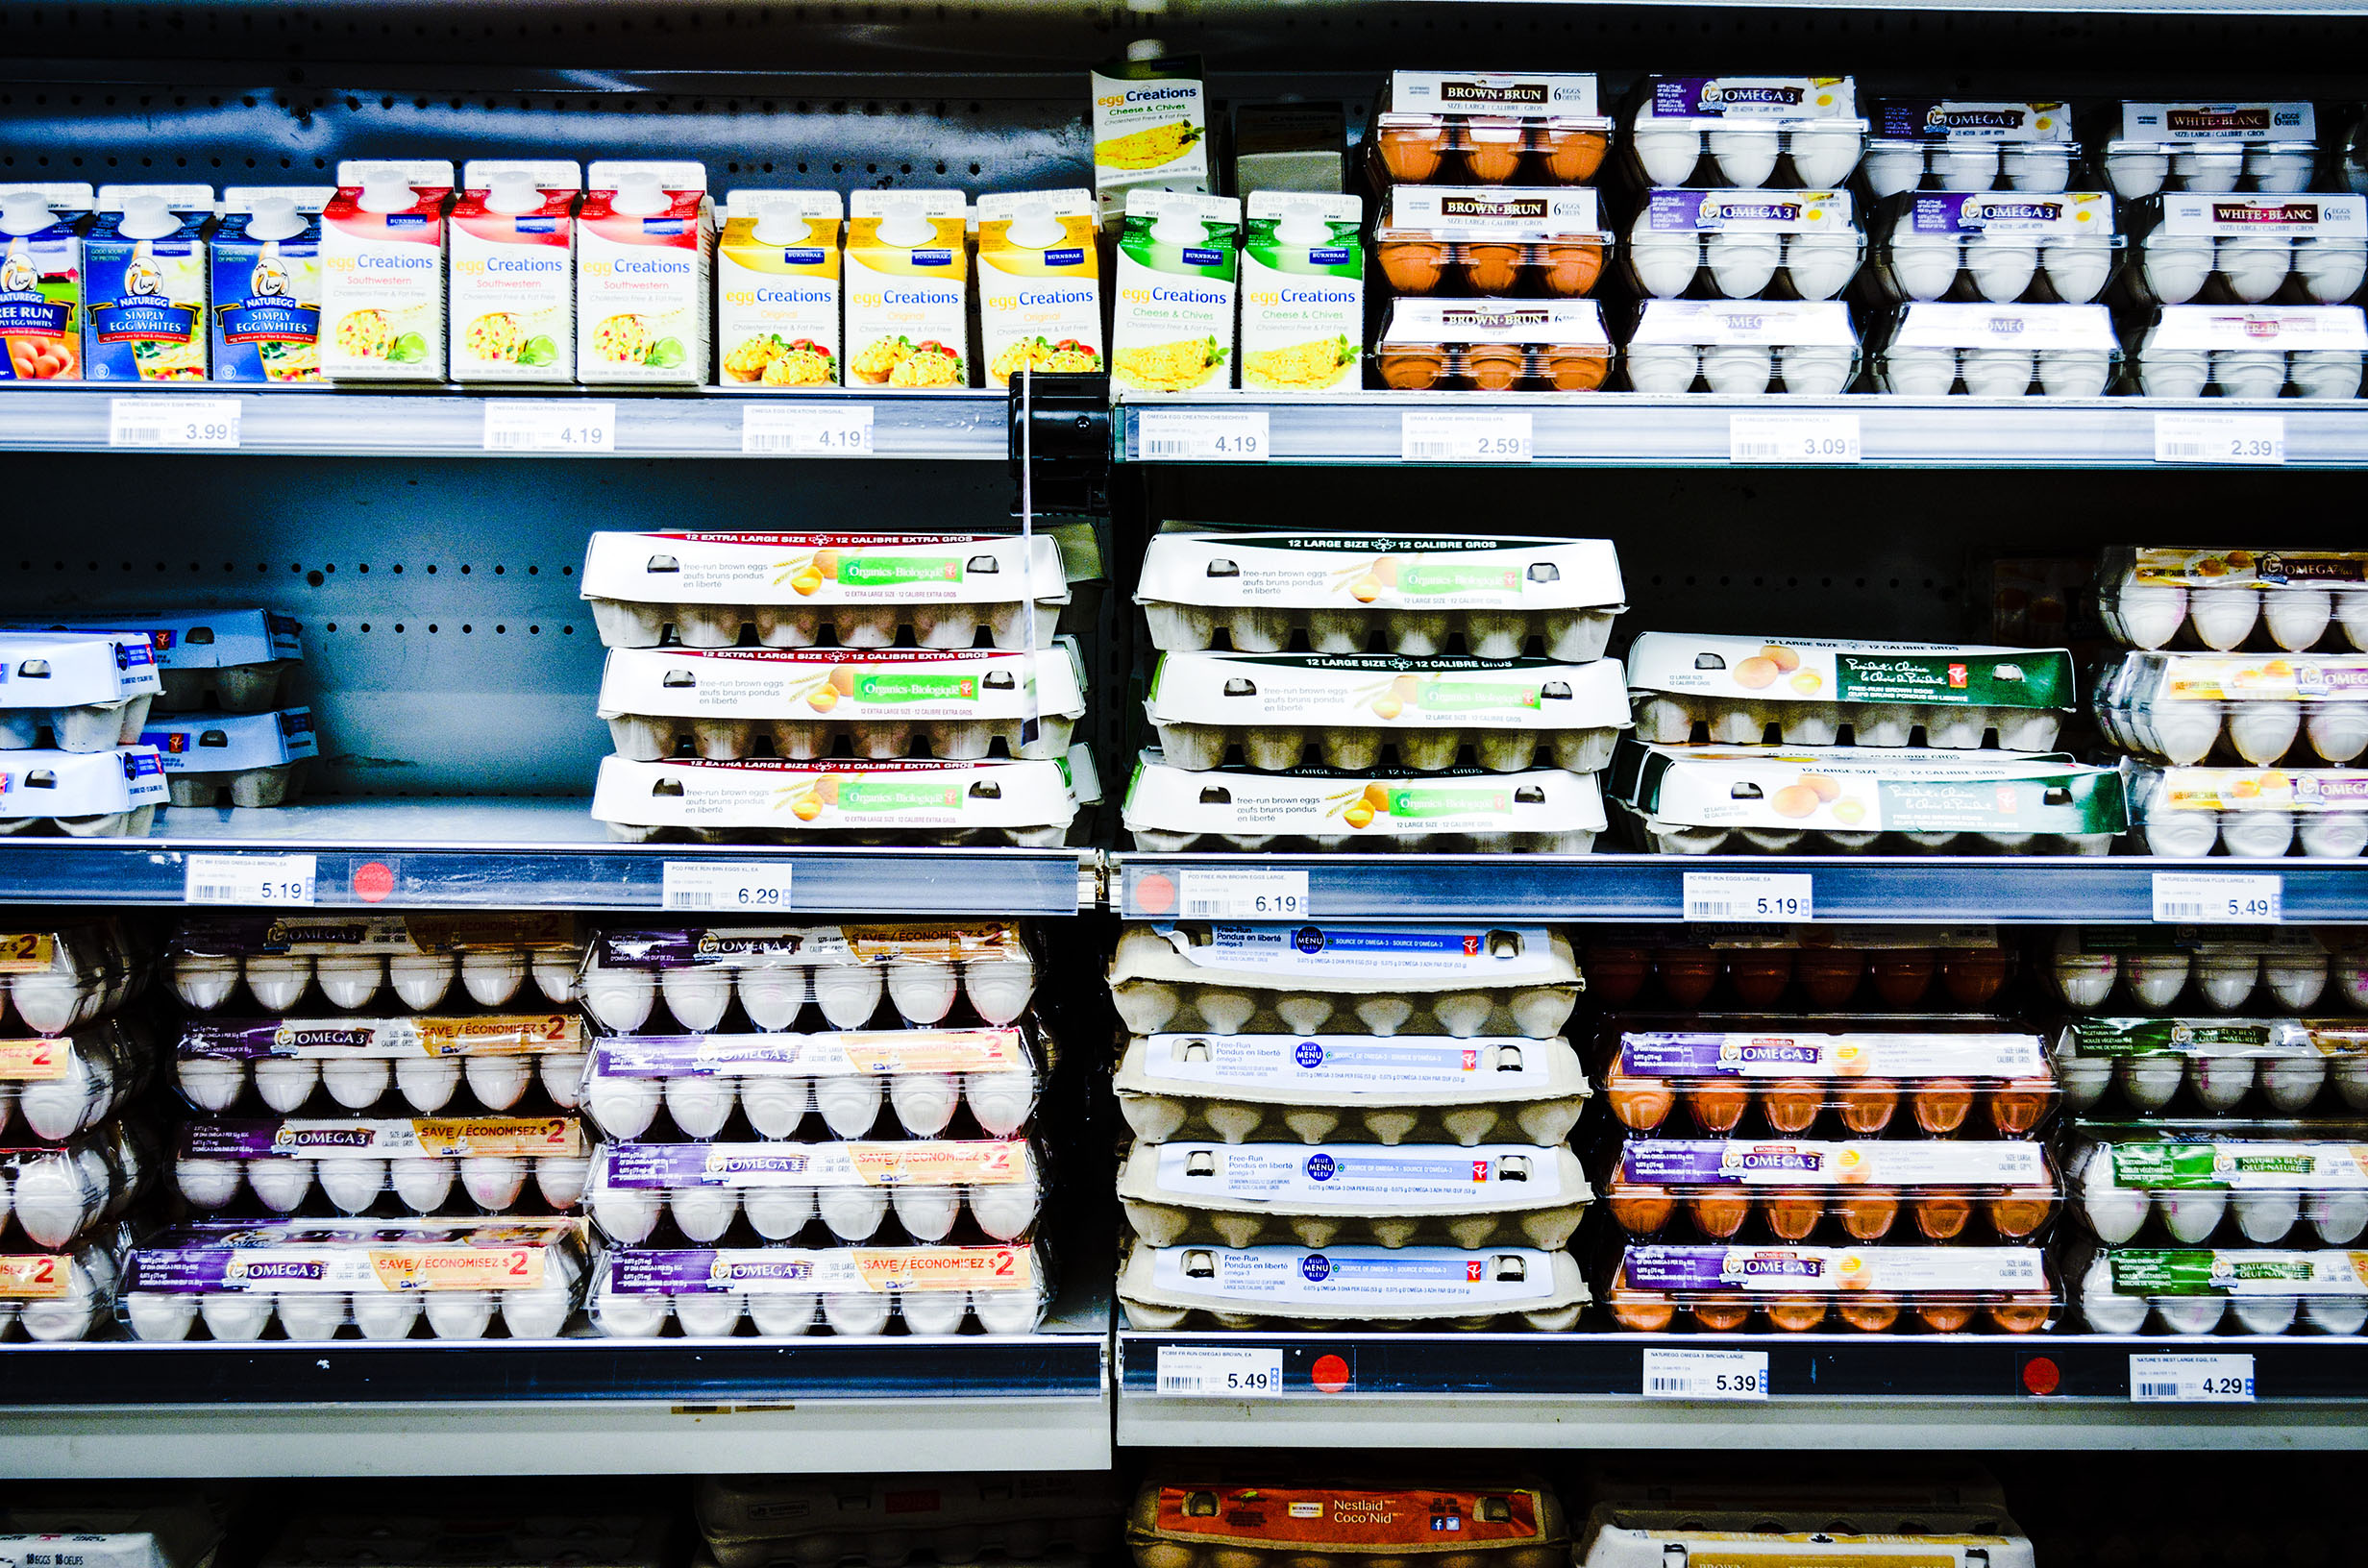 Eggs on display in a grocery store aisle.